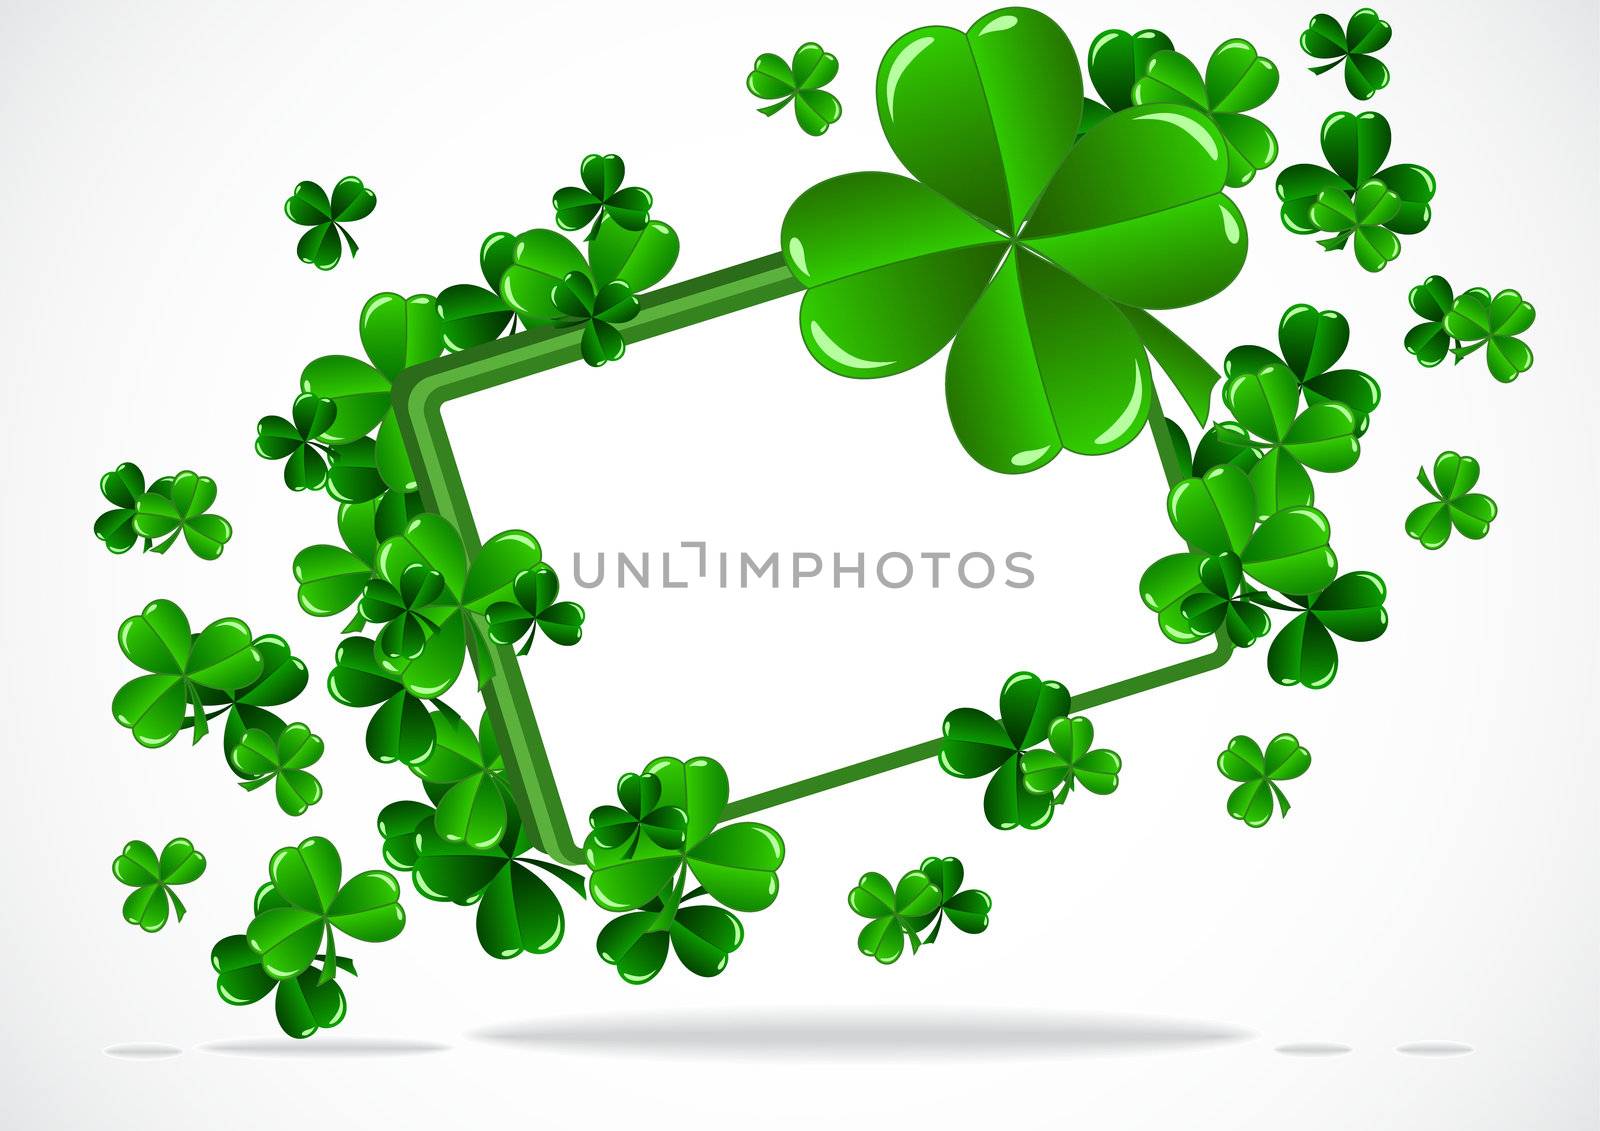 abstract background of St Patrick Day with shamrock vector illustration